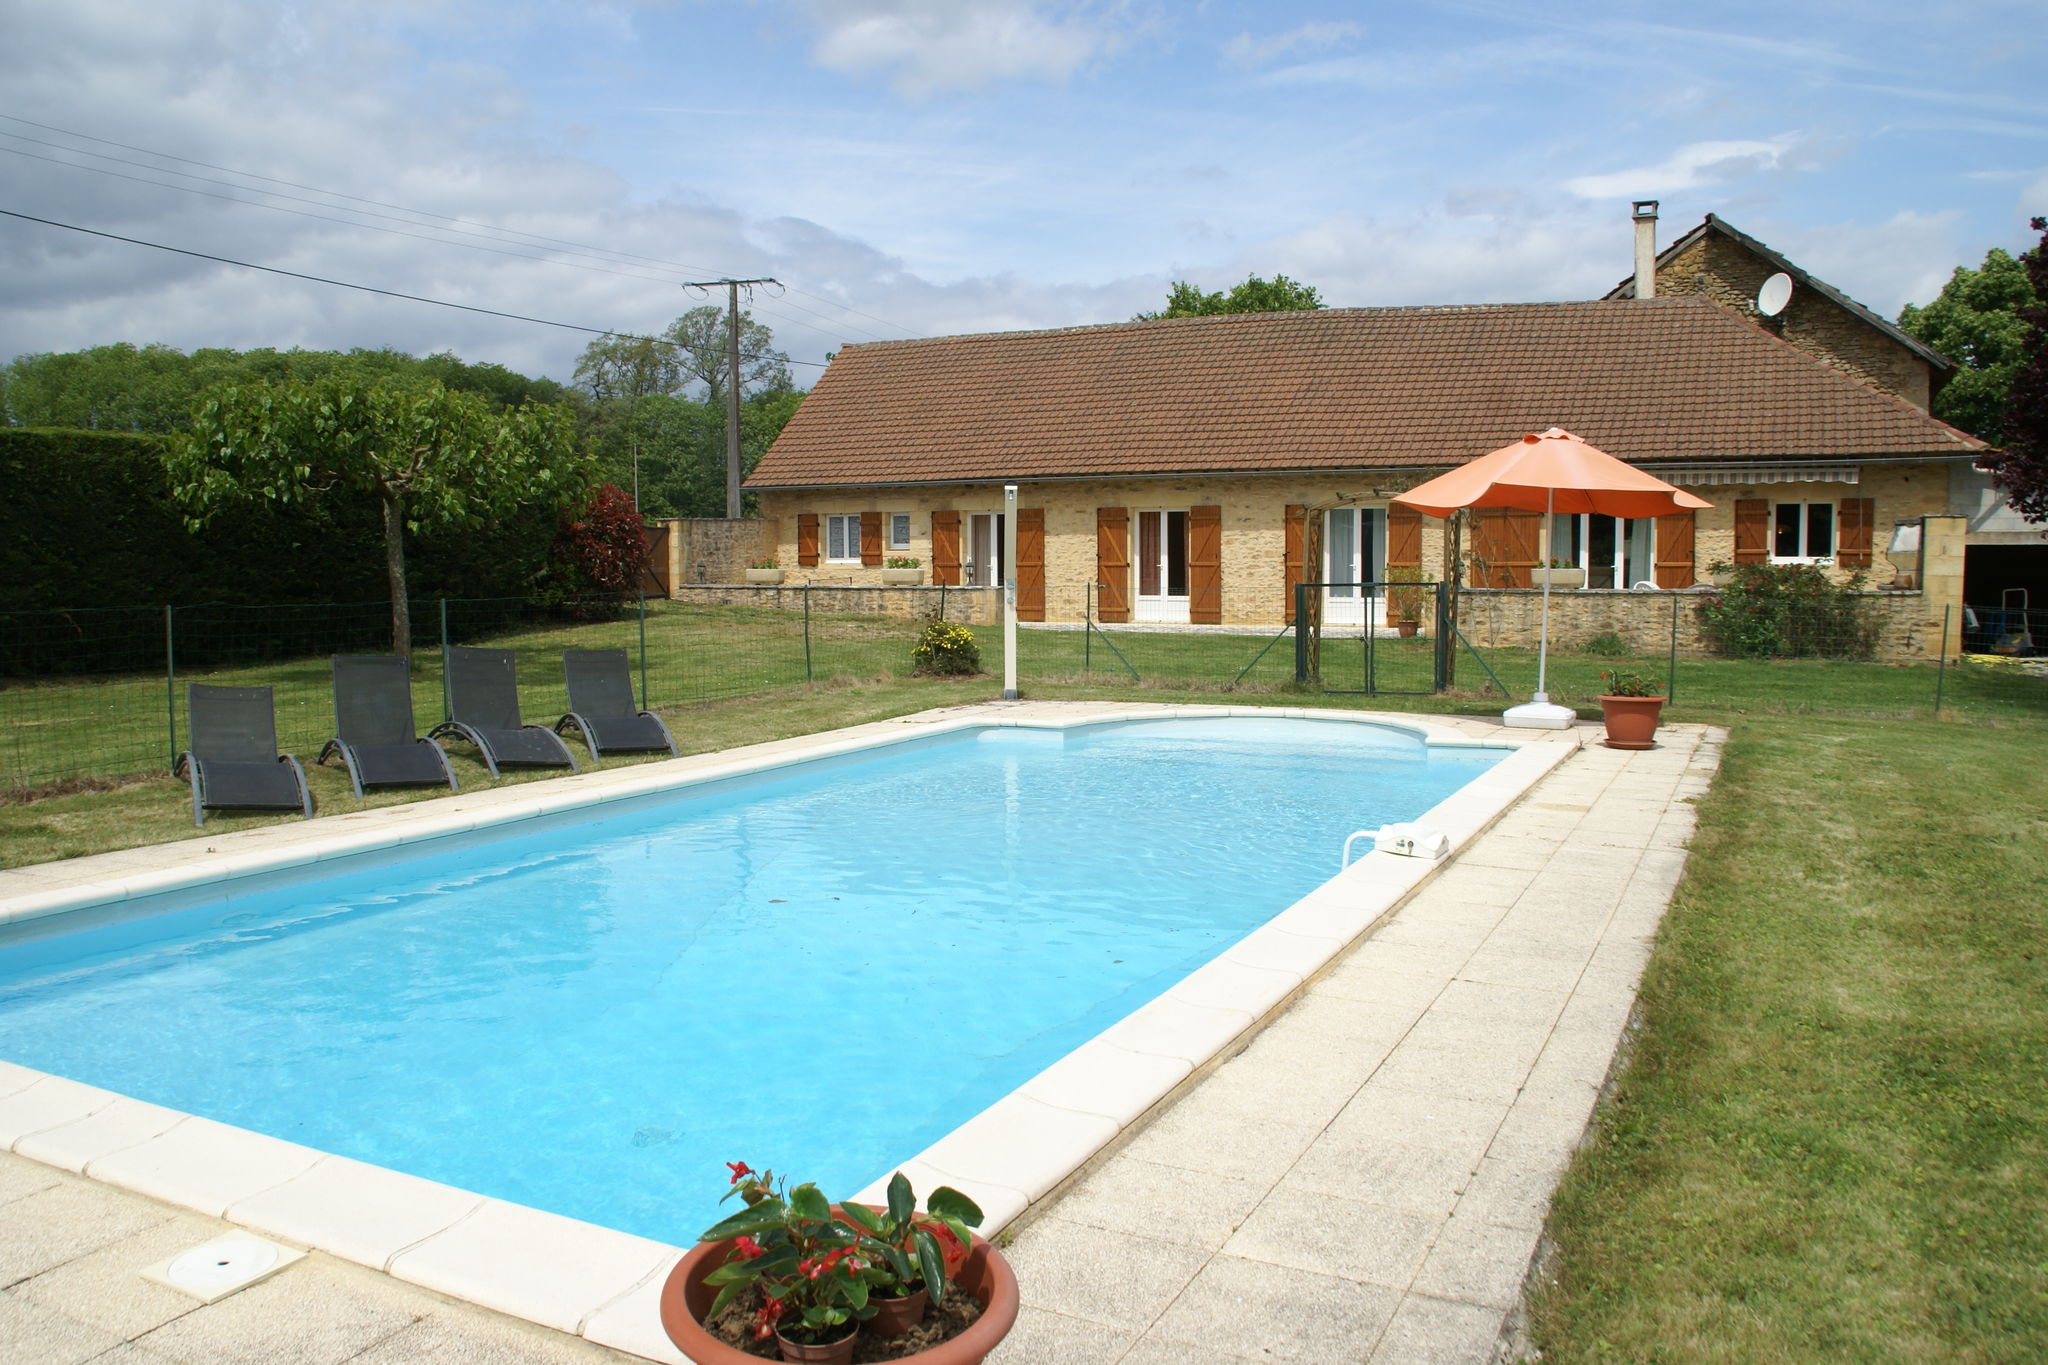 Beautiful holiday home on a single floor, with swimming pool and enclosed garden